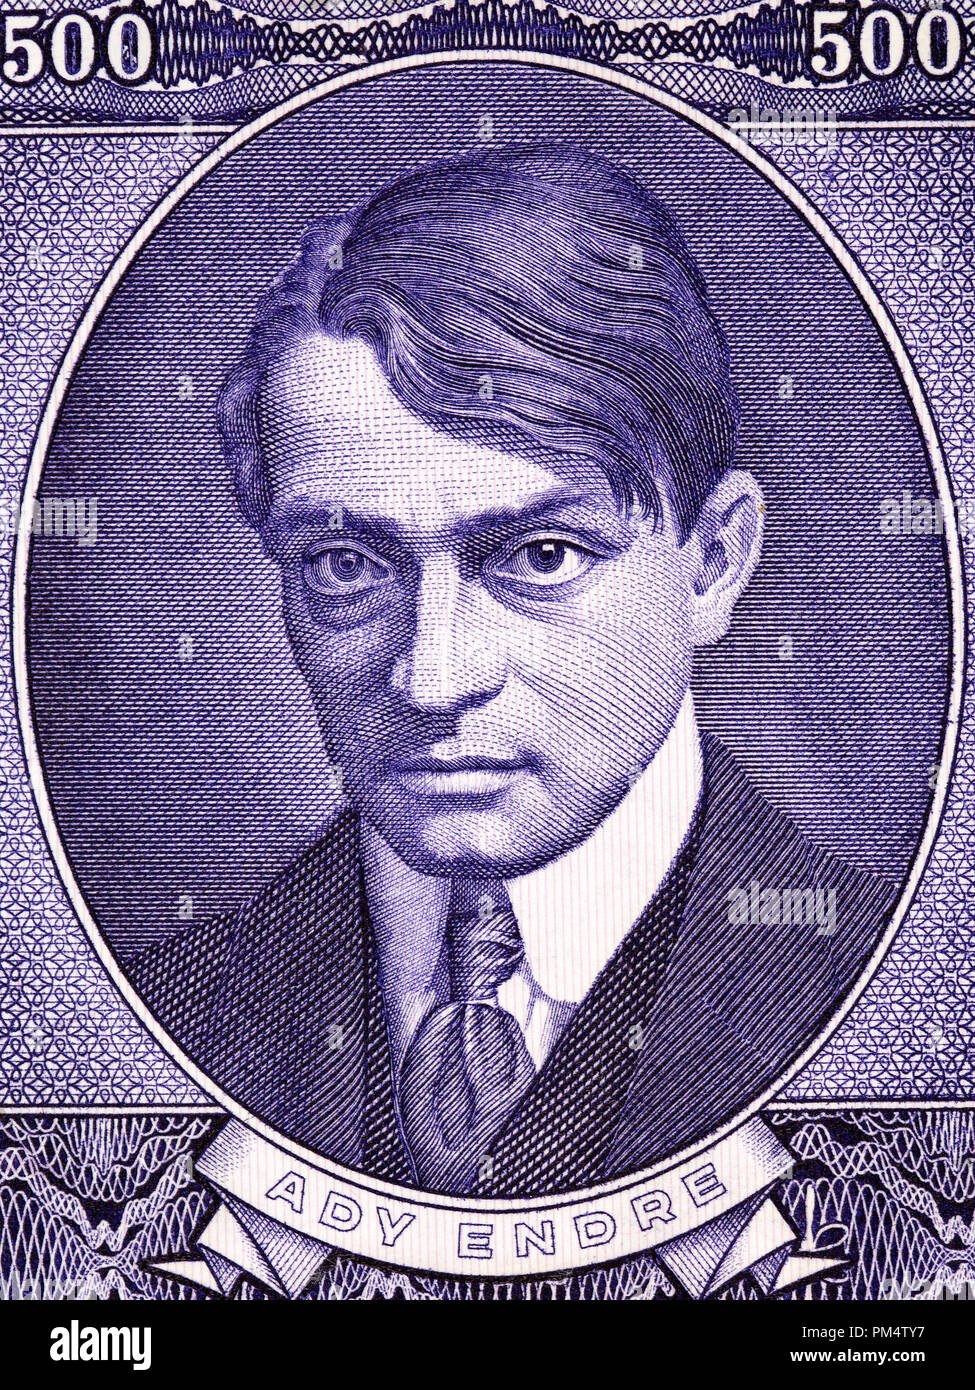 Endre Ady portrait from Hungarian money Stock Photo